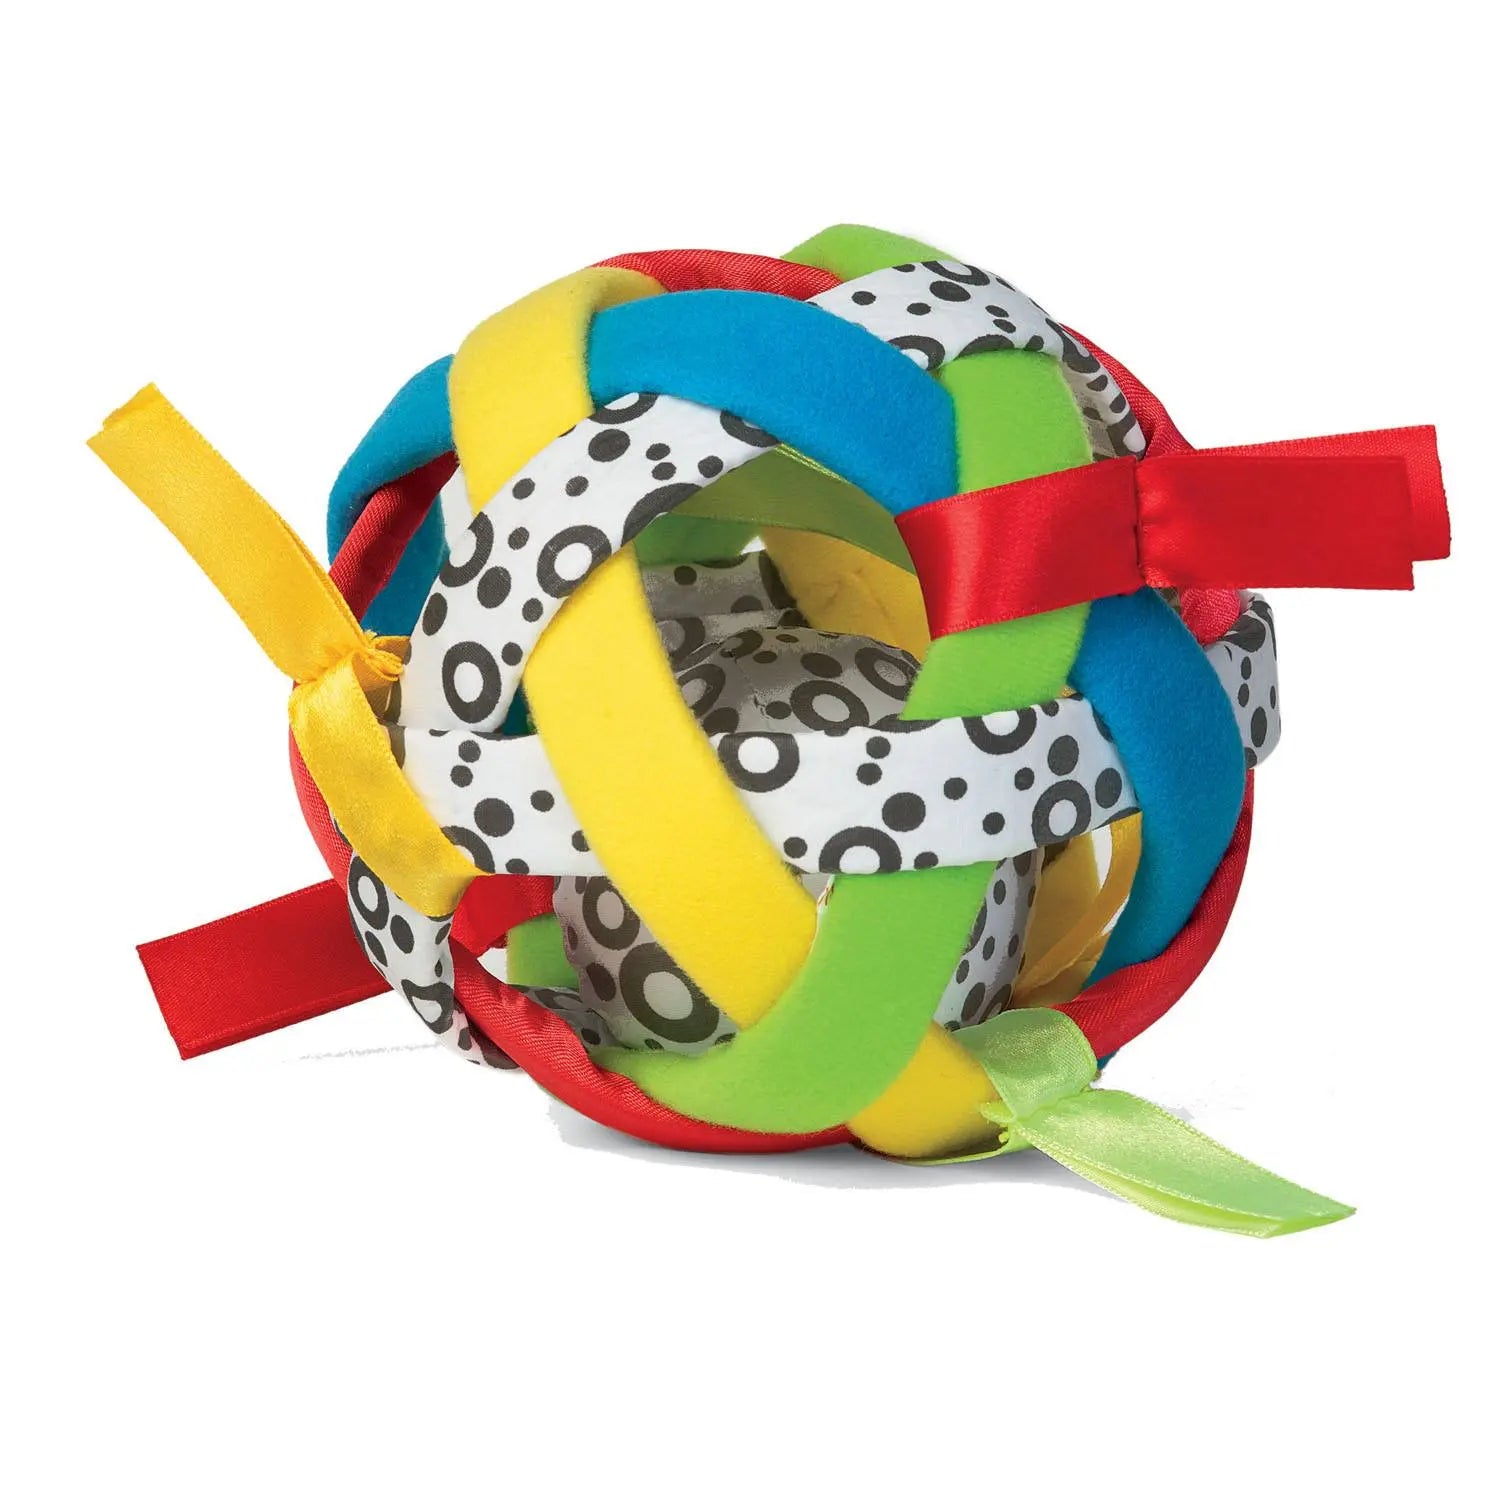 Bababall by Manhattan Toy - HoneyBug 